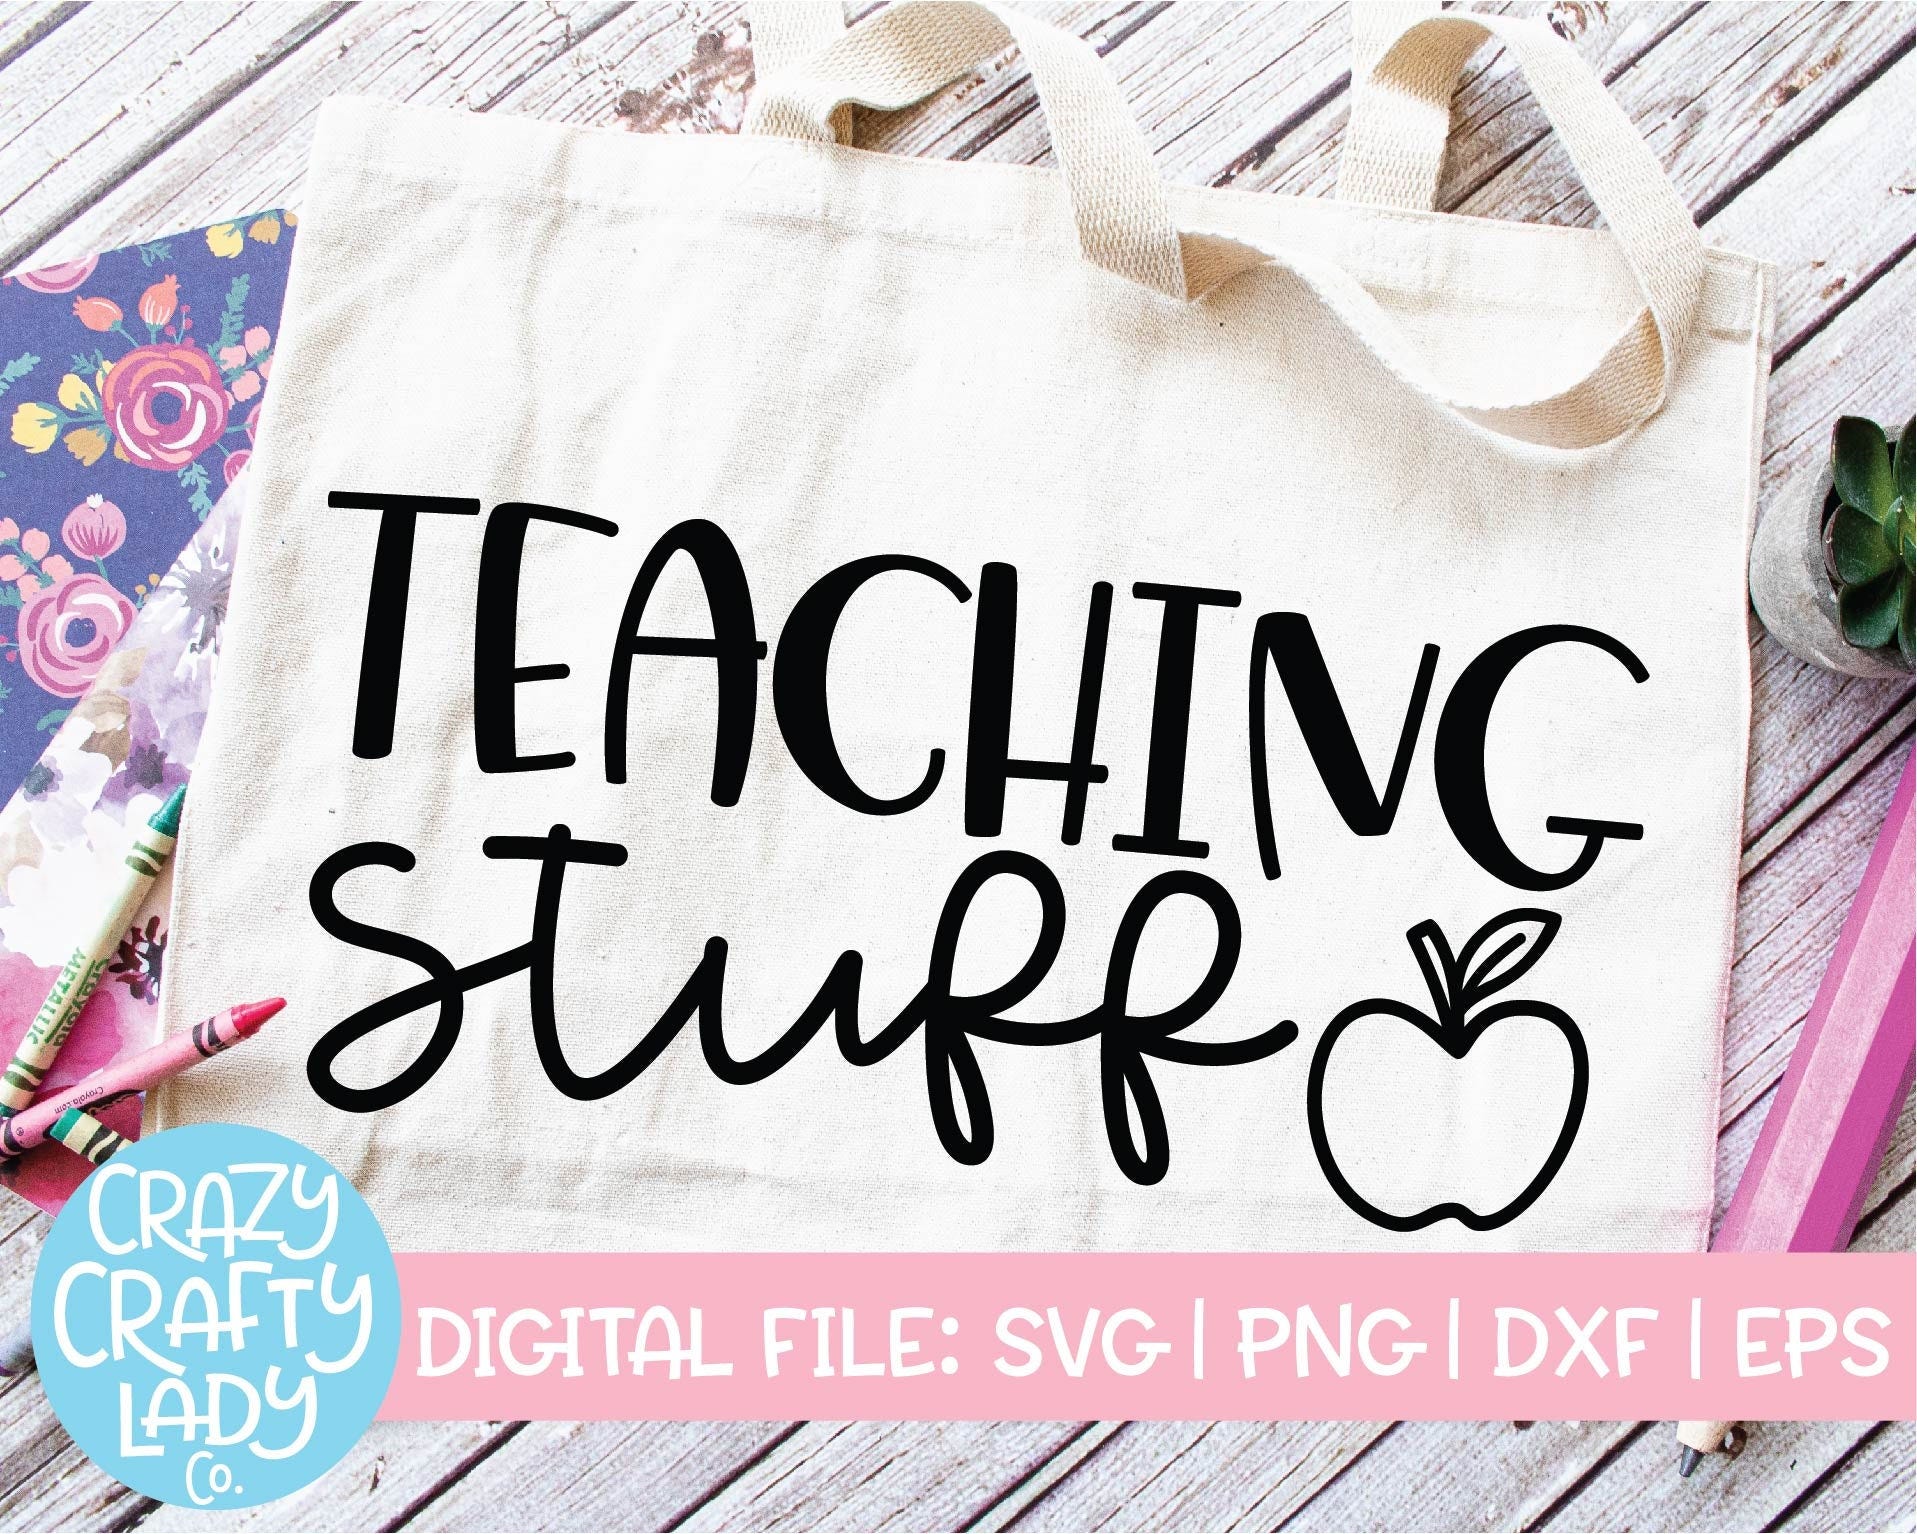 Teaching Stuff SVG, Tote Bag Cut File, Teacher Saying, Appreciation Design, 1st Day Quote, Back to School, dxf eps png, Silhouette or Cricut